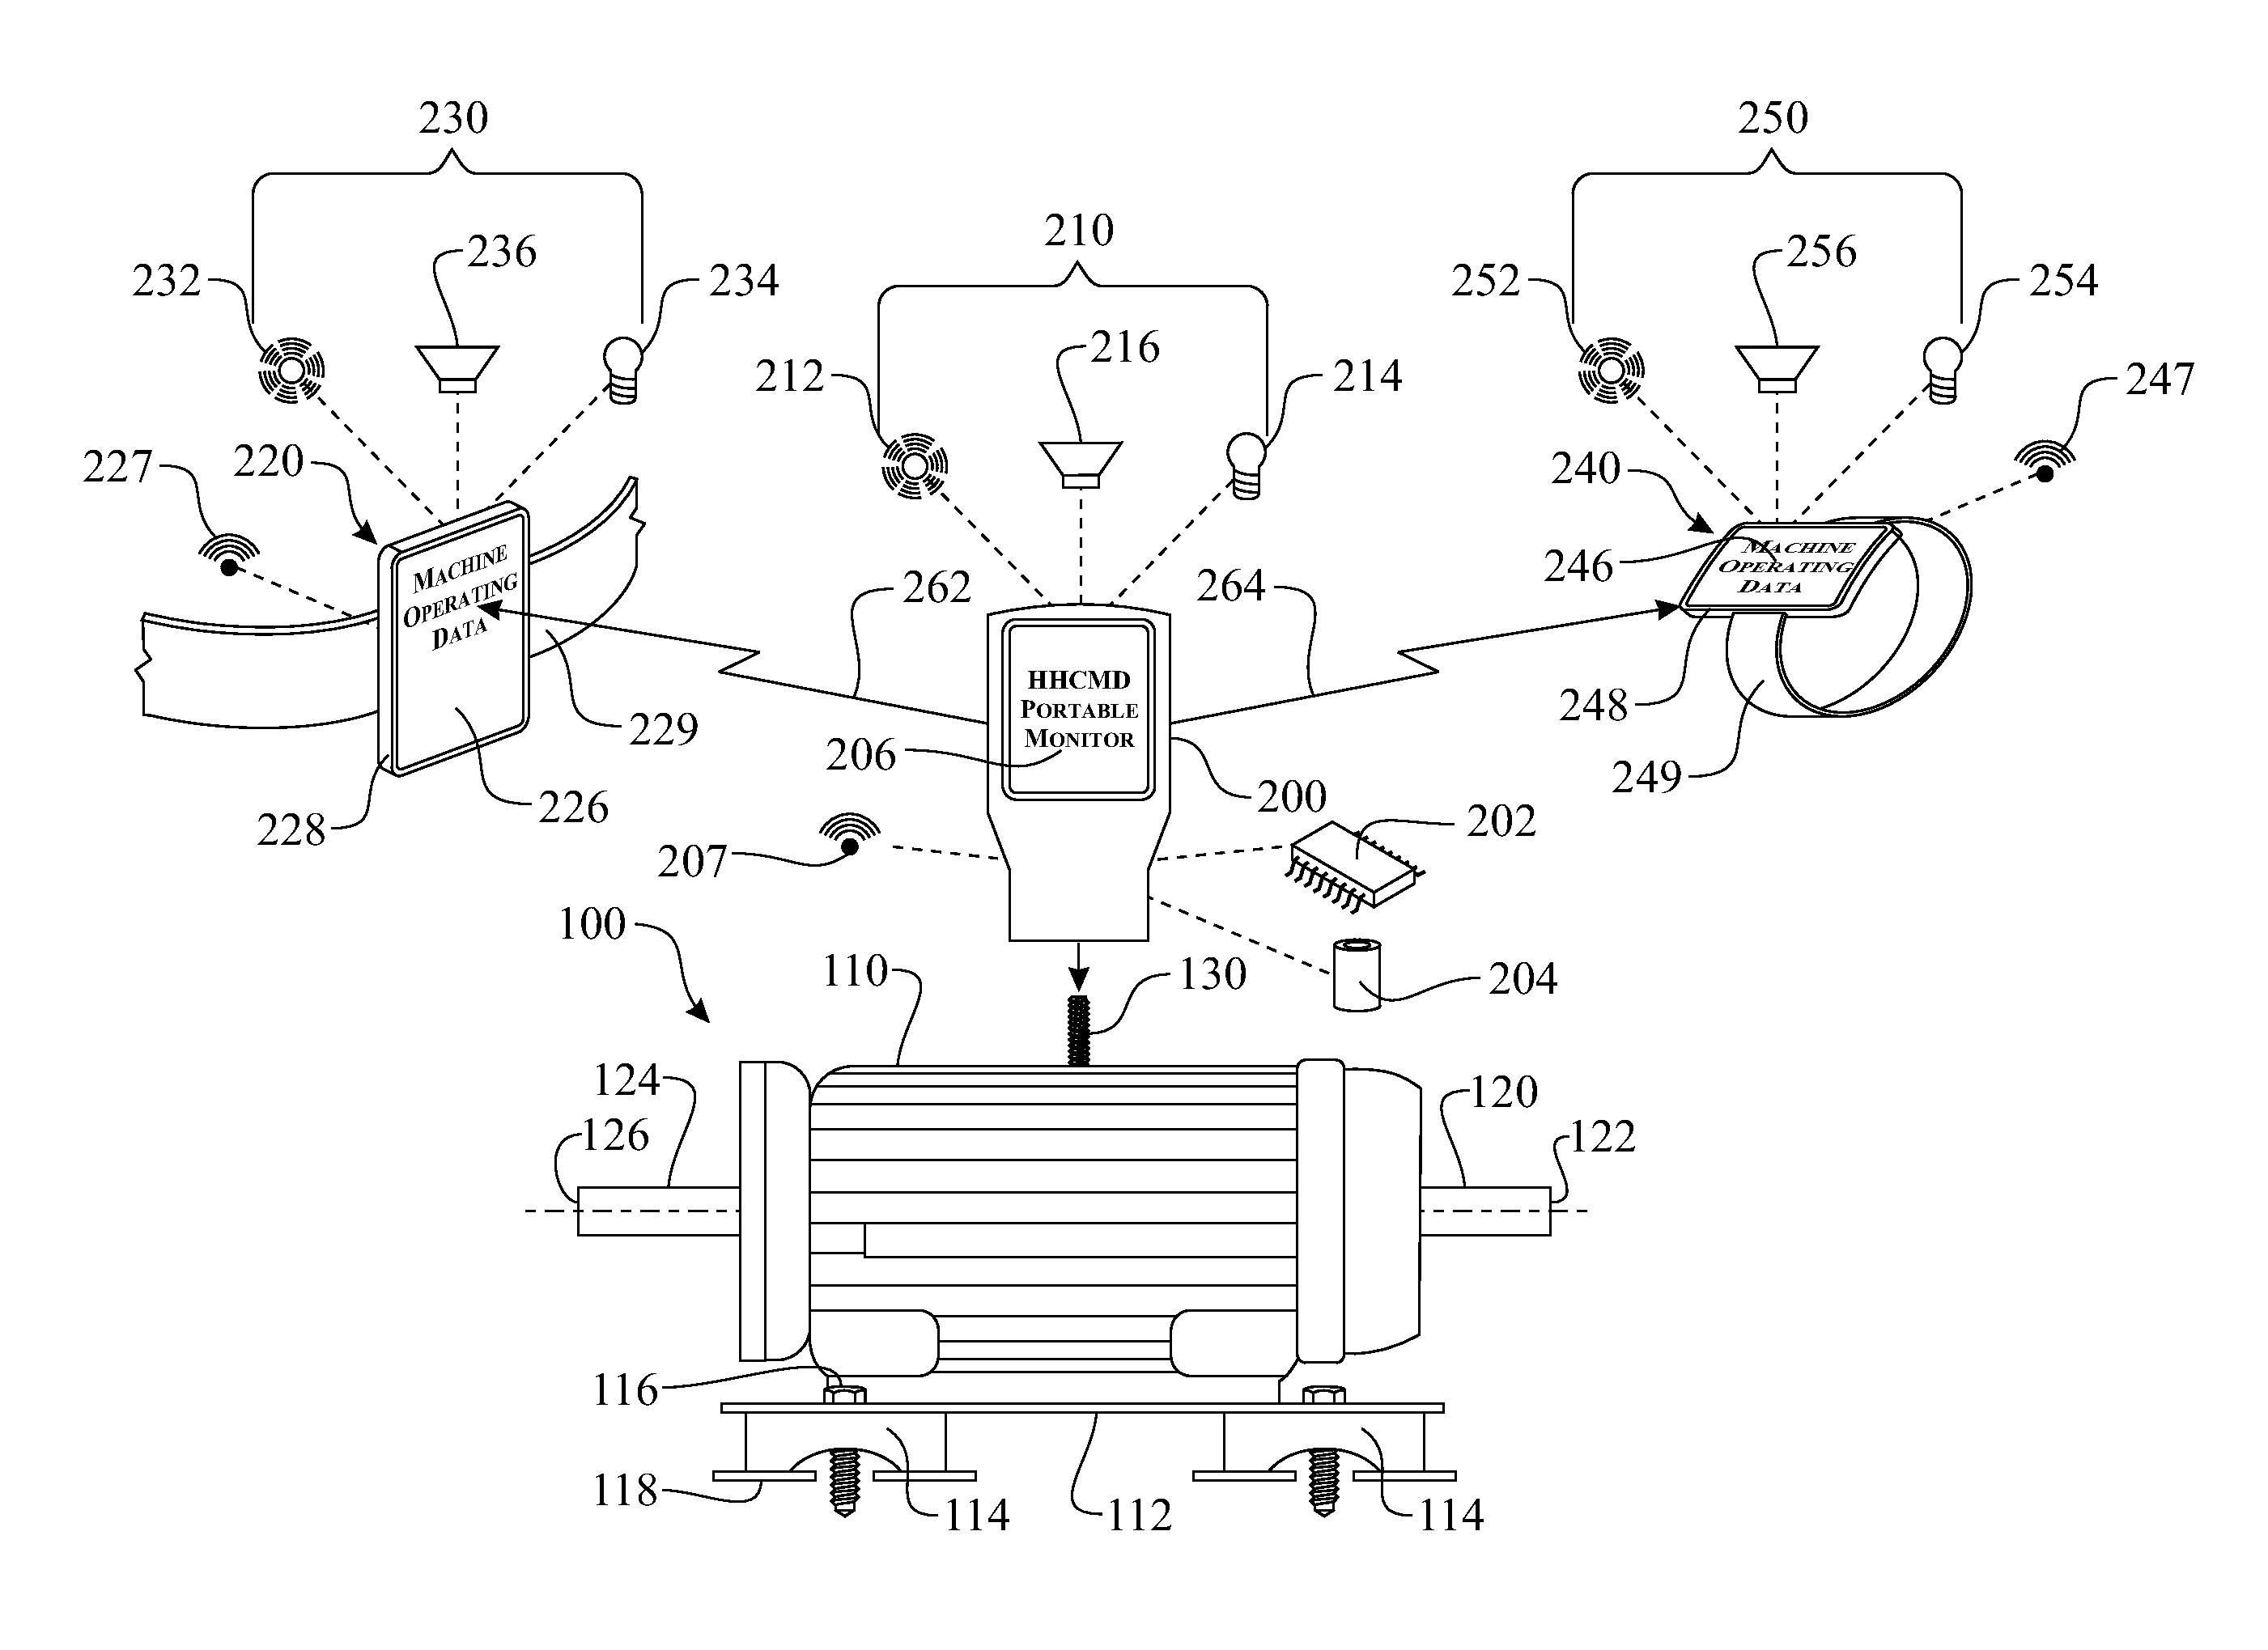 Machine condition measurement system with haptic feedback